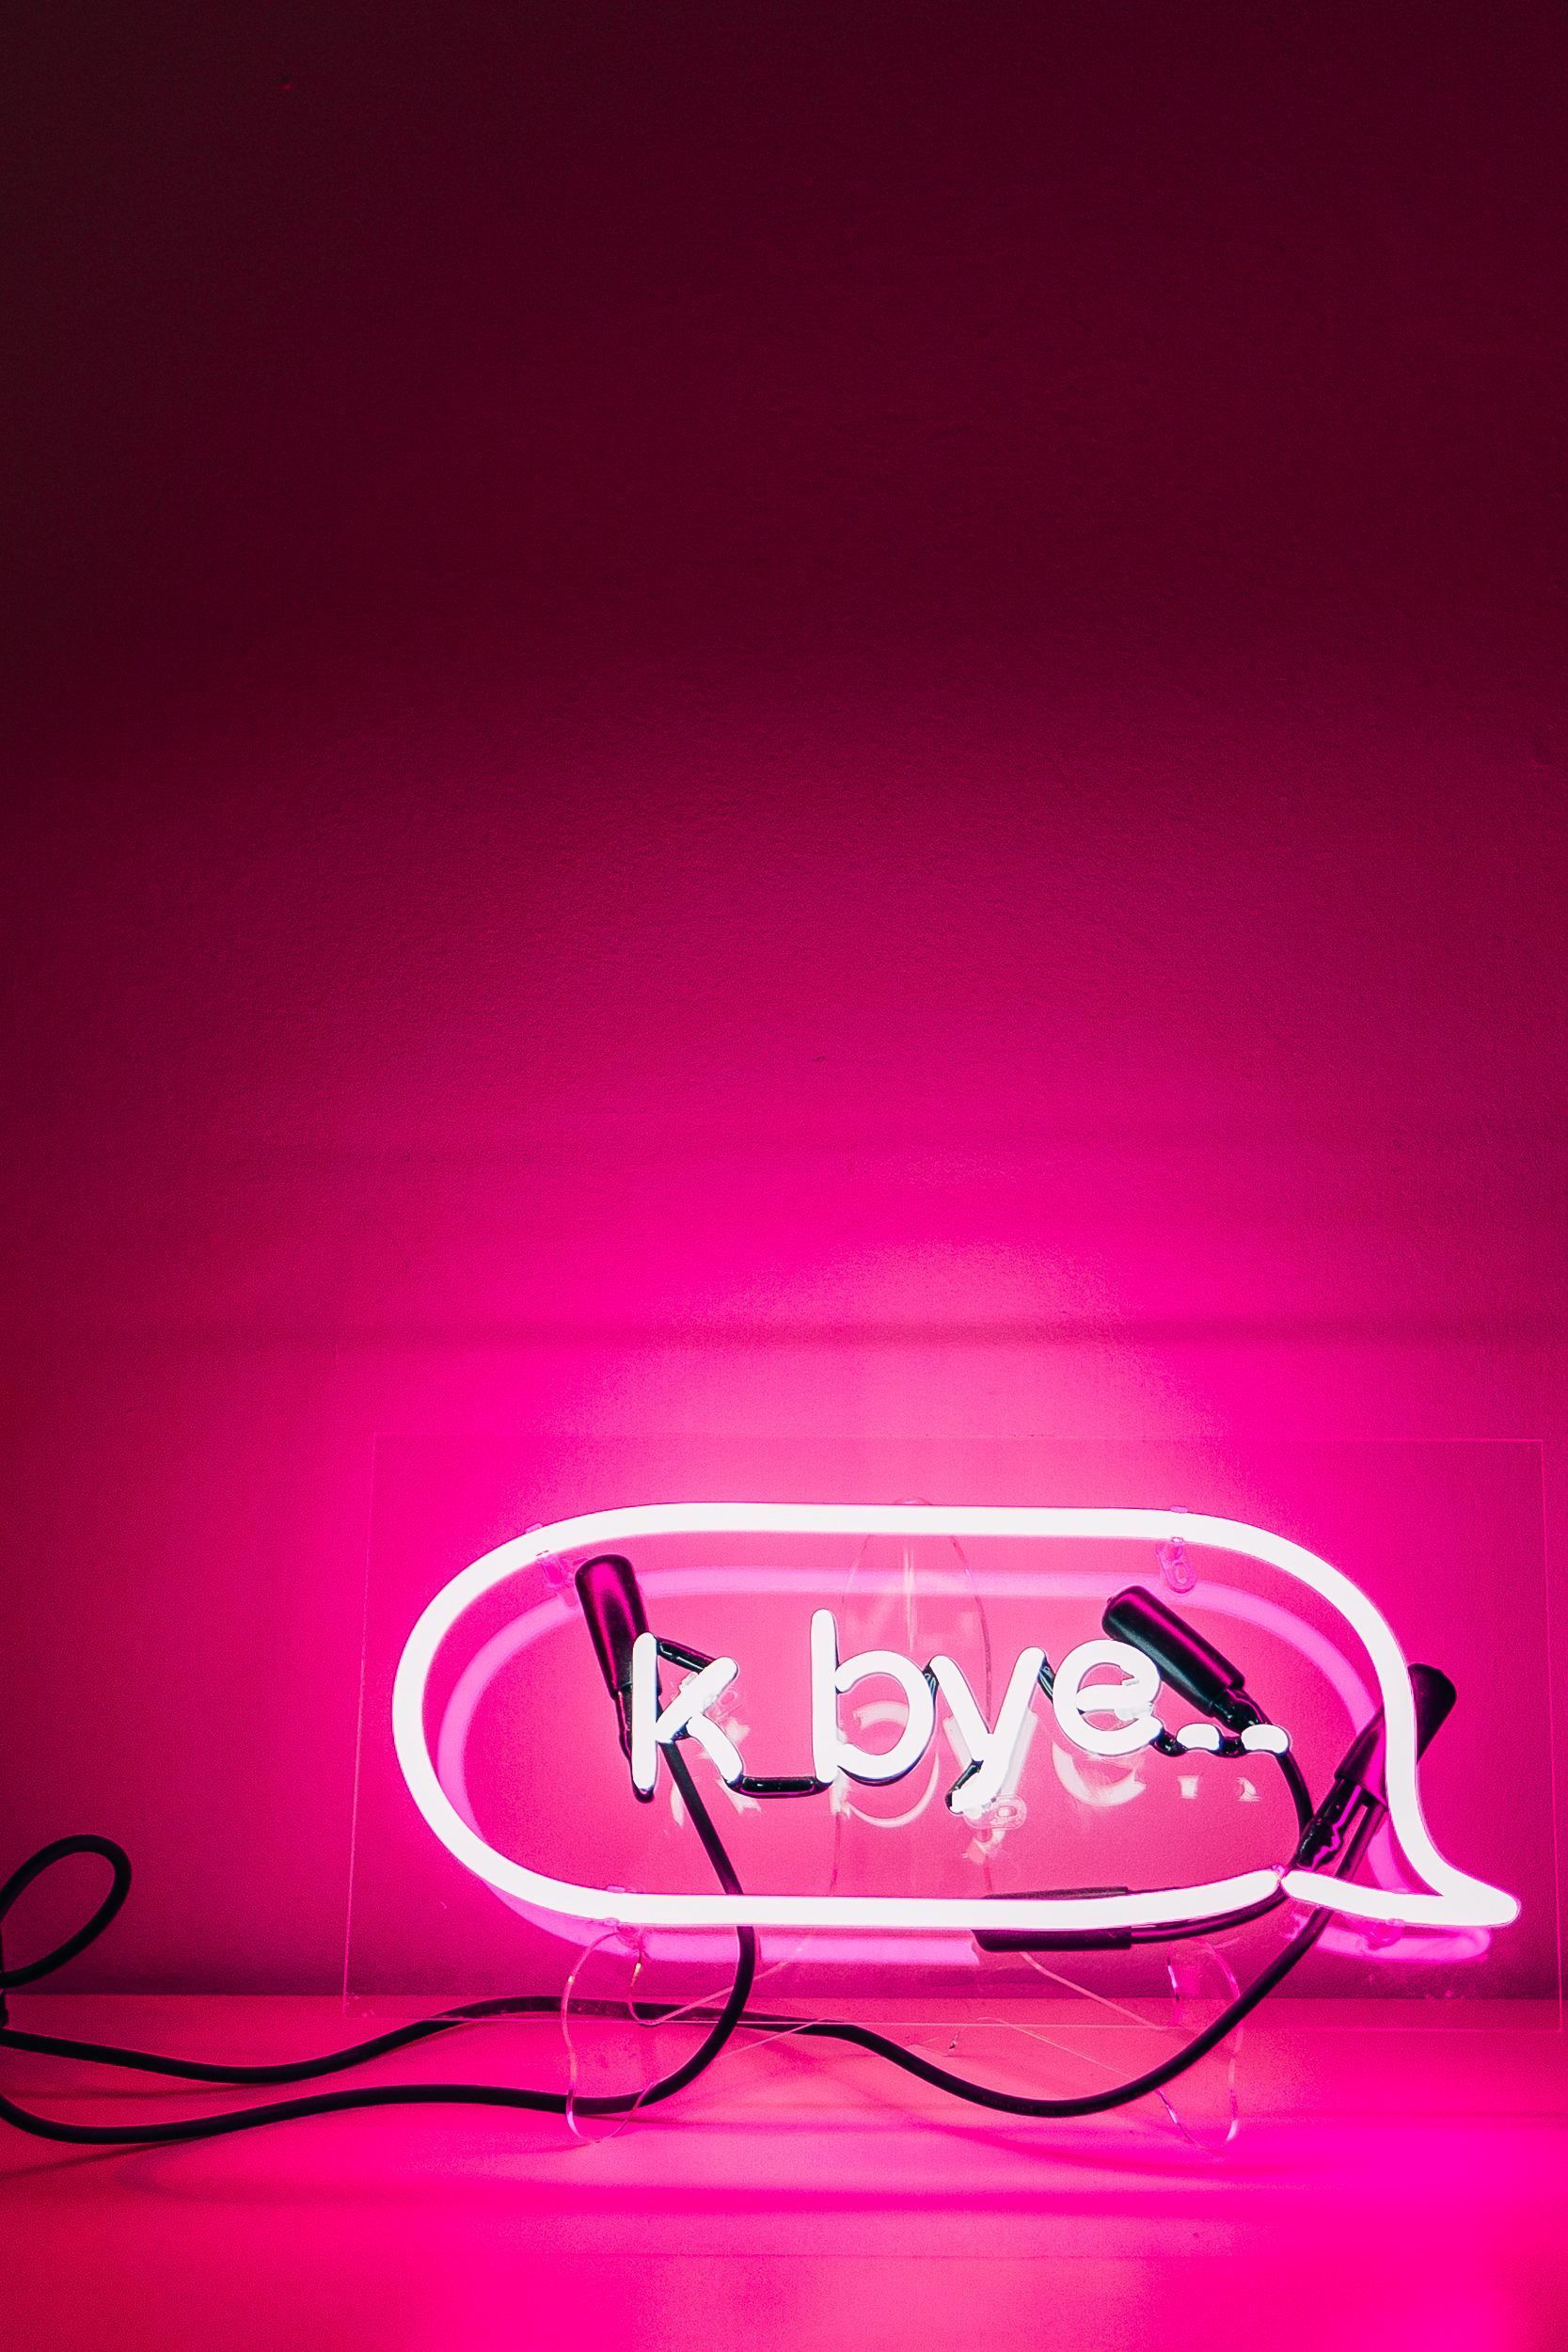 aesthetic neon wallpapers baddie backgrounds signs iphone led lights bye chrissie miller uo interviews verlichting collage savage interview bright urban